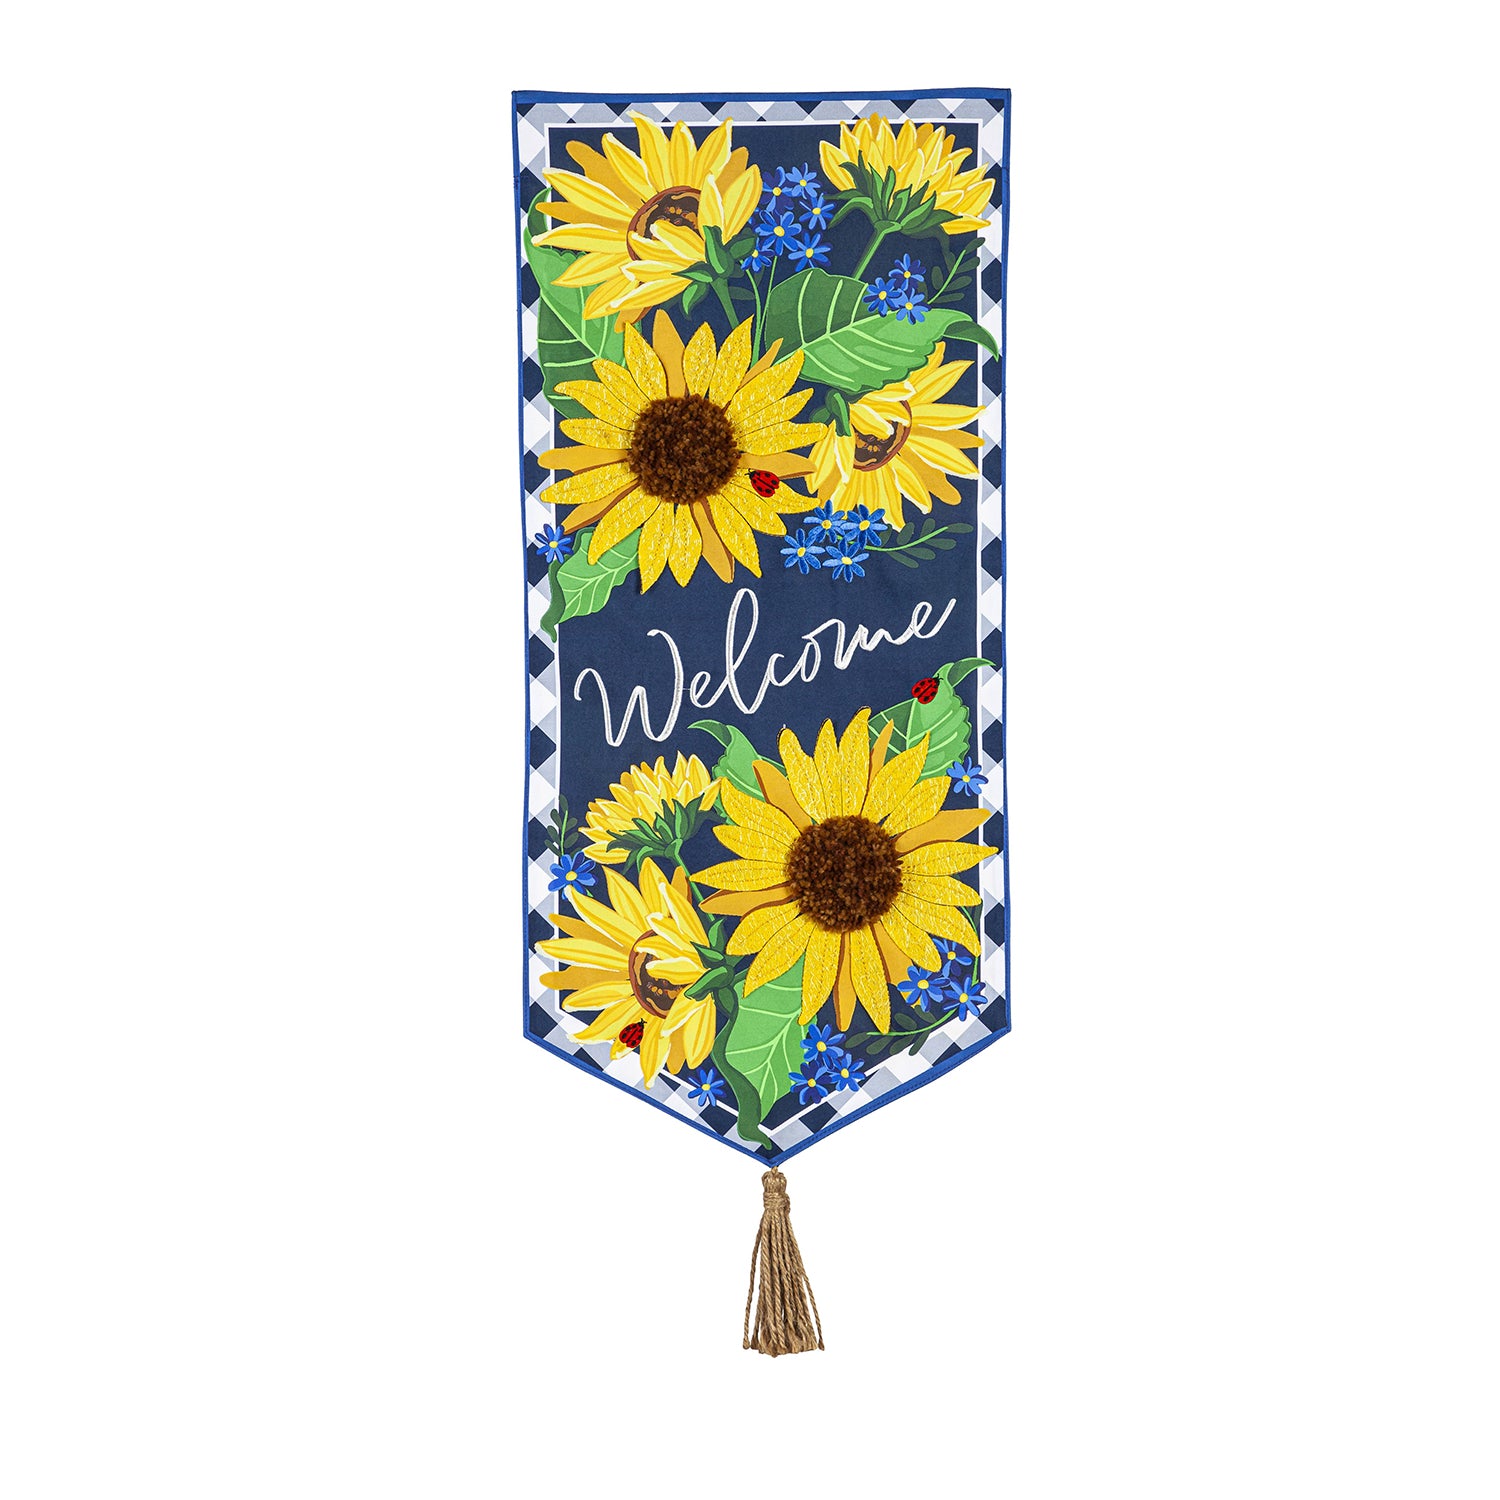 Sunflower Welcome Everlasting Impressions Textile Decor